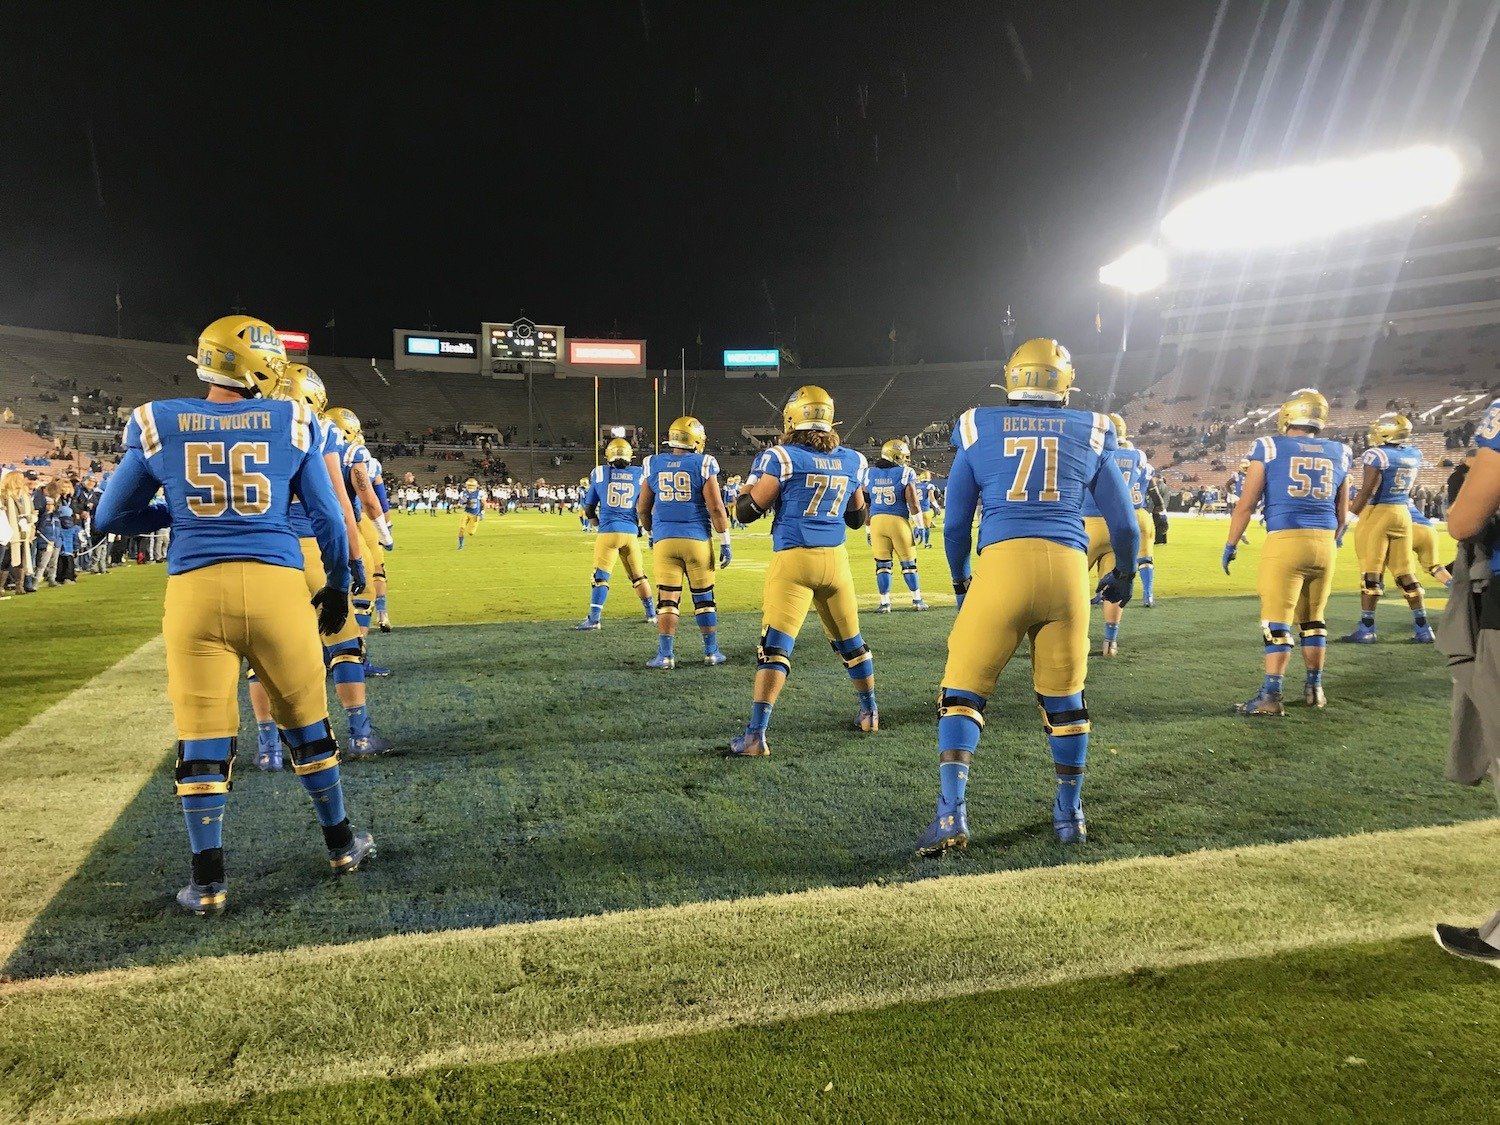 UCLA Offensive Linemen Warmup Before Final Game Of 2019 Season. Photo Credit: Ryan Dyrud | The LAFB Network